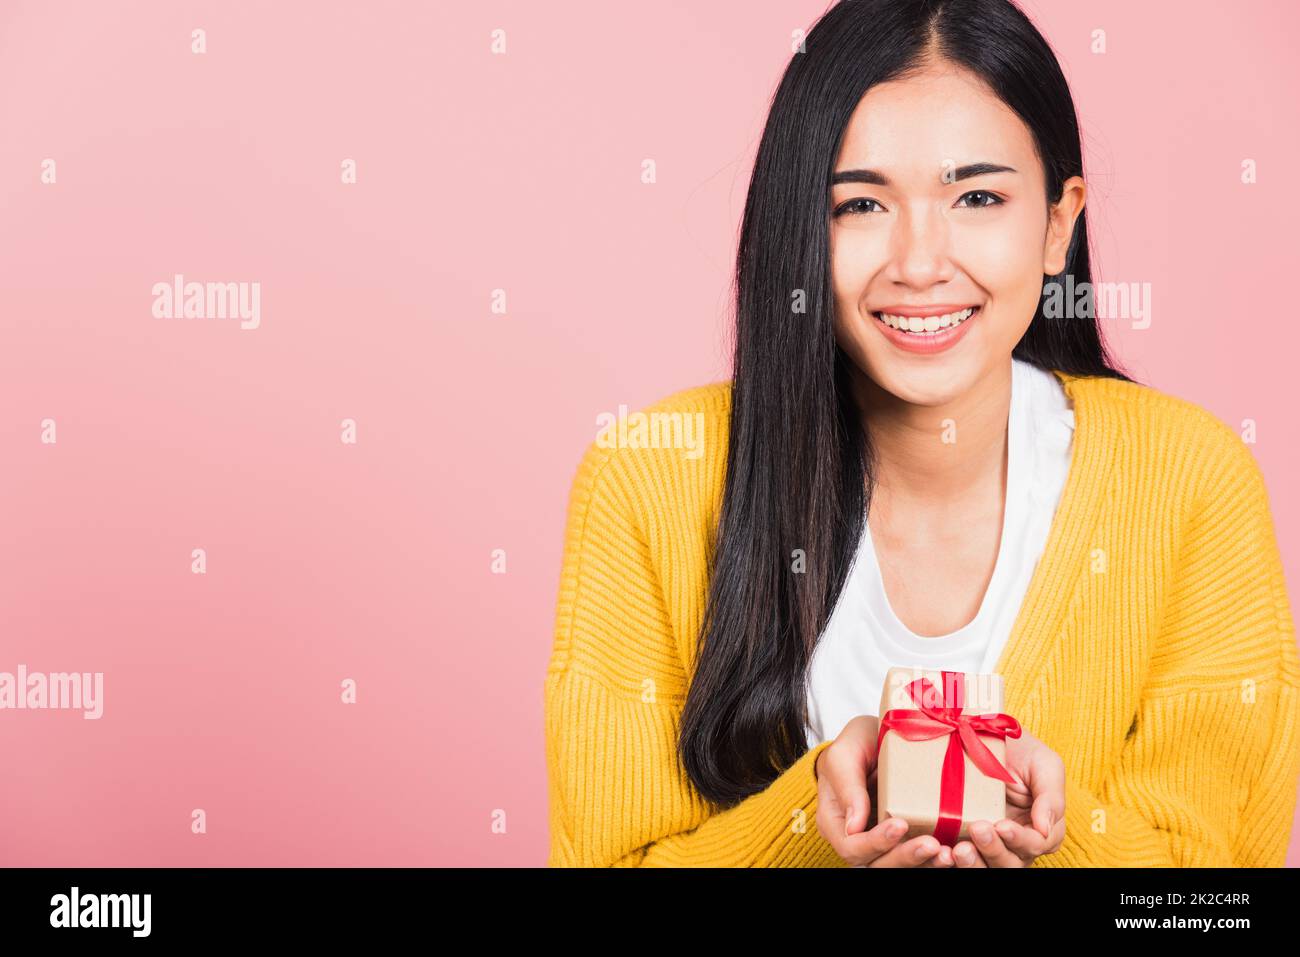 woman smiling holding small gift box on hands Stock Photo